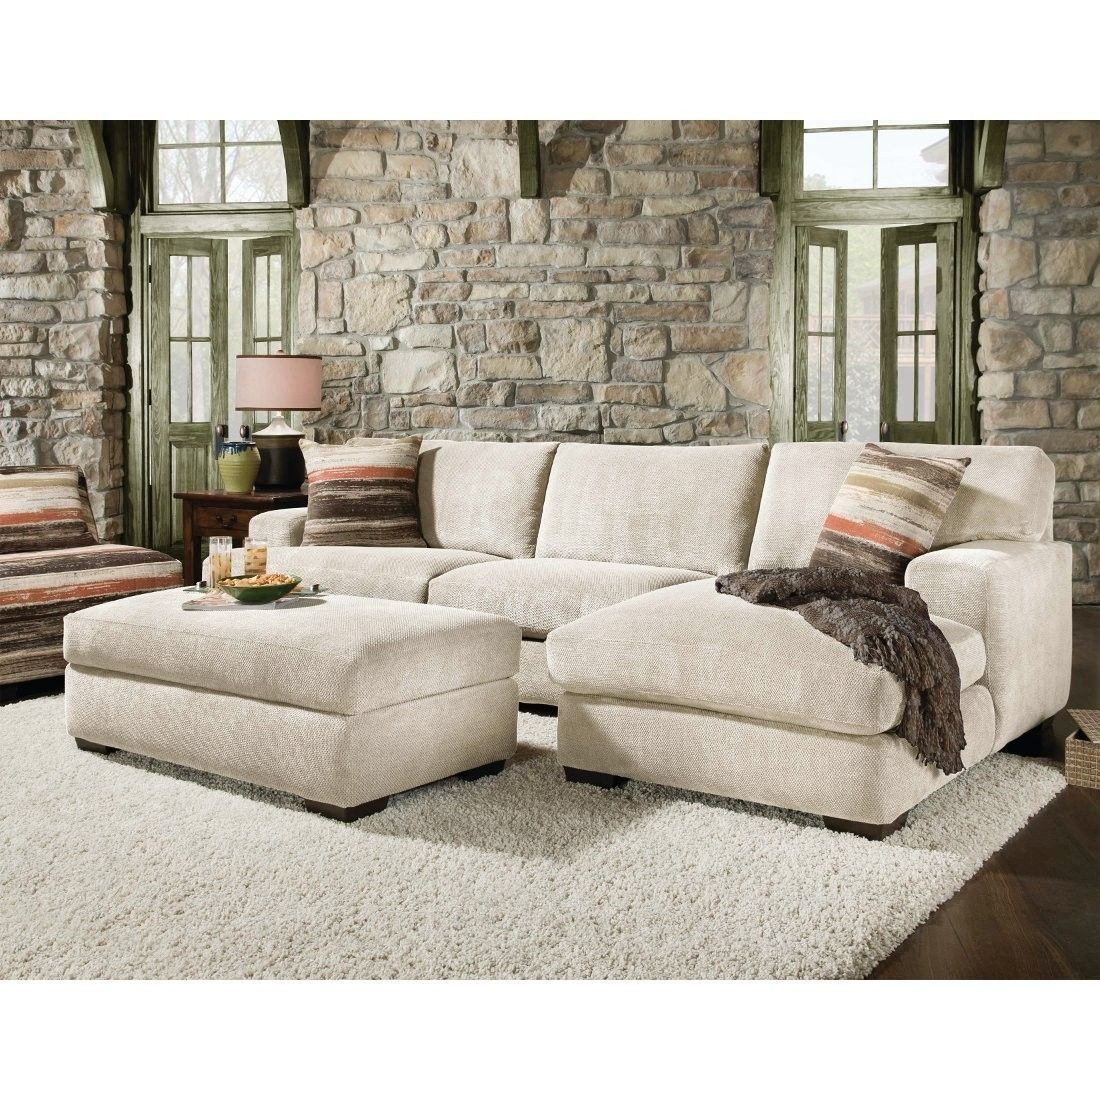 Sectional Sofa Design: Sectional Sofa With Chaise And Ottoman Sofa Pertaining To Sectionals With Chaise And Ottoman (View 4 of 15)